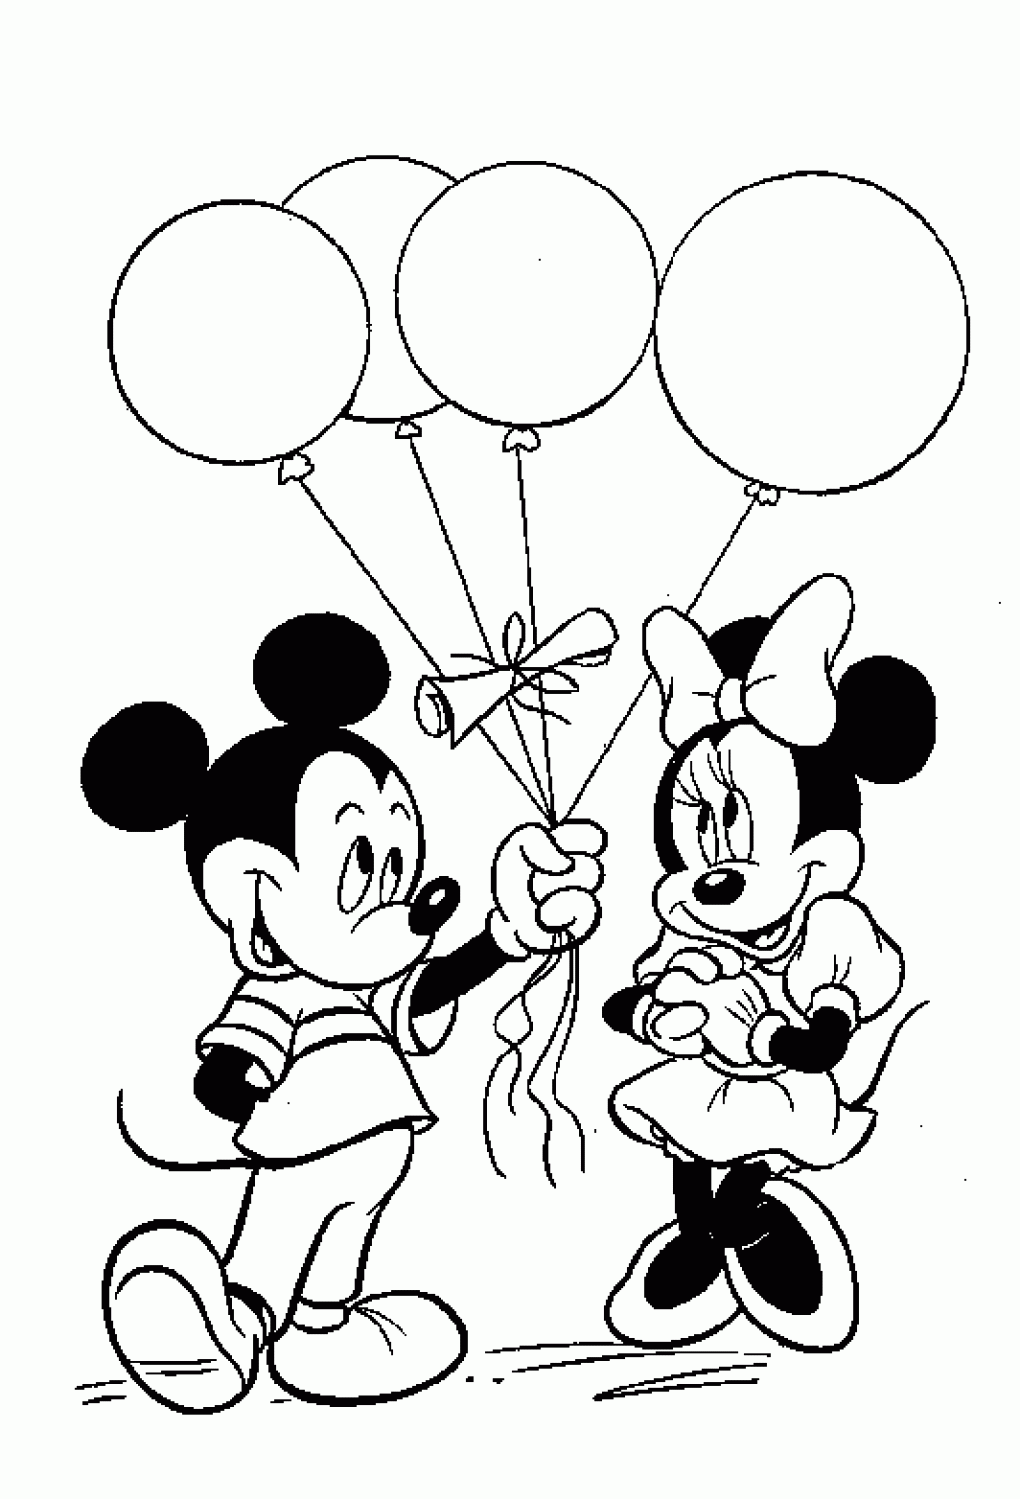 Free Coloring Pages of Mickey Mouse: 40 Image to Print ...